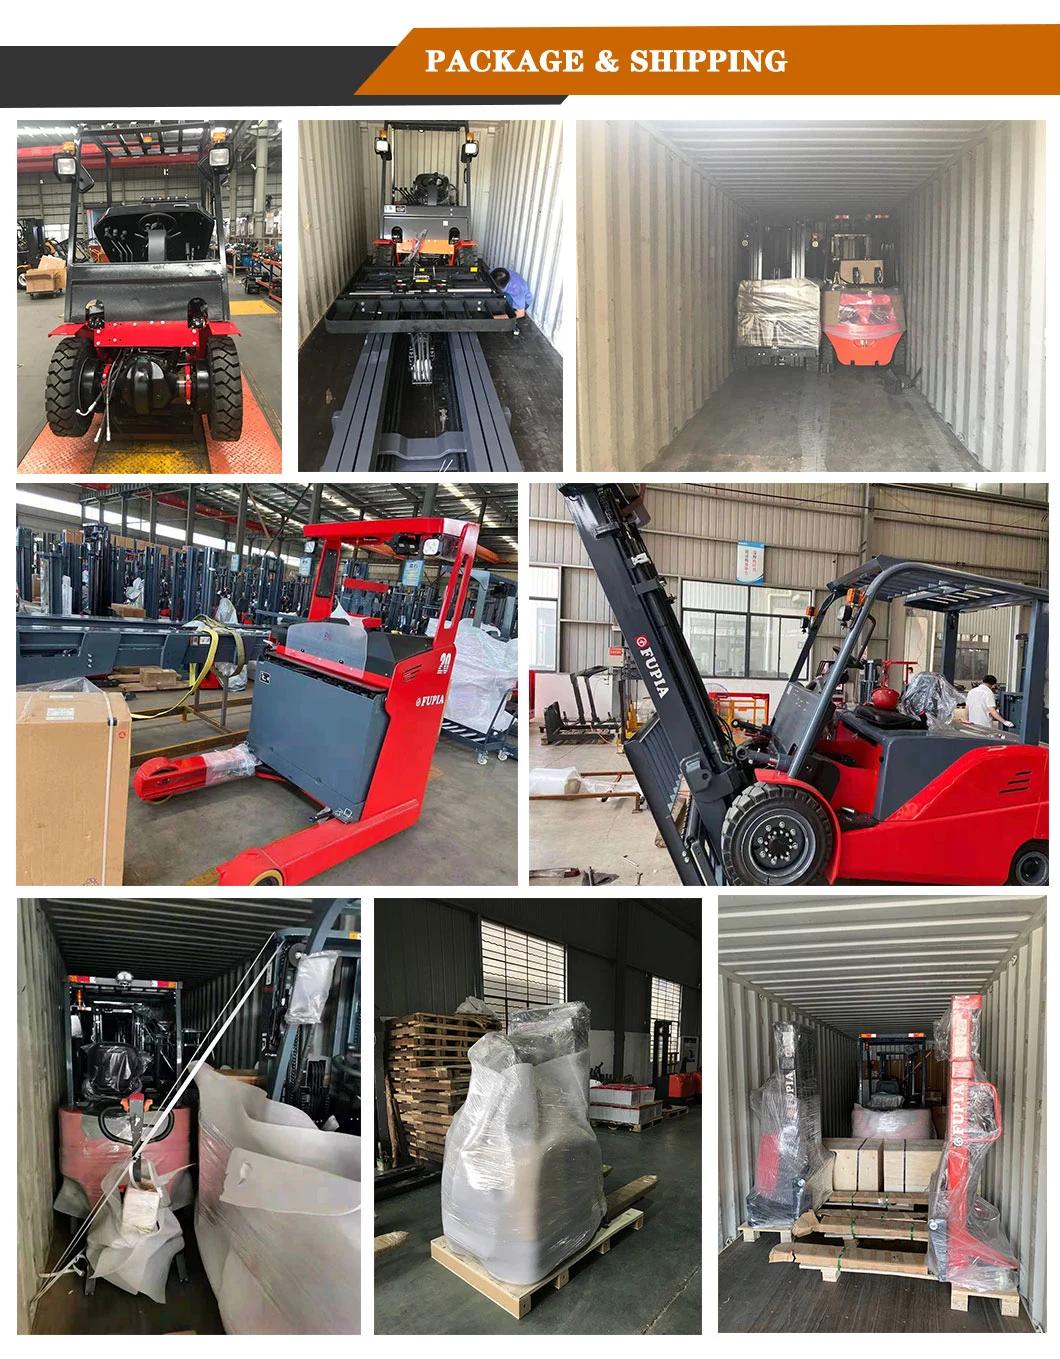 Material Handling Equipment Linde Forklift Technology 5000kg Capacity Battery Operated 4 Wheel Drive 5 Ton Electric Forklift Truck